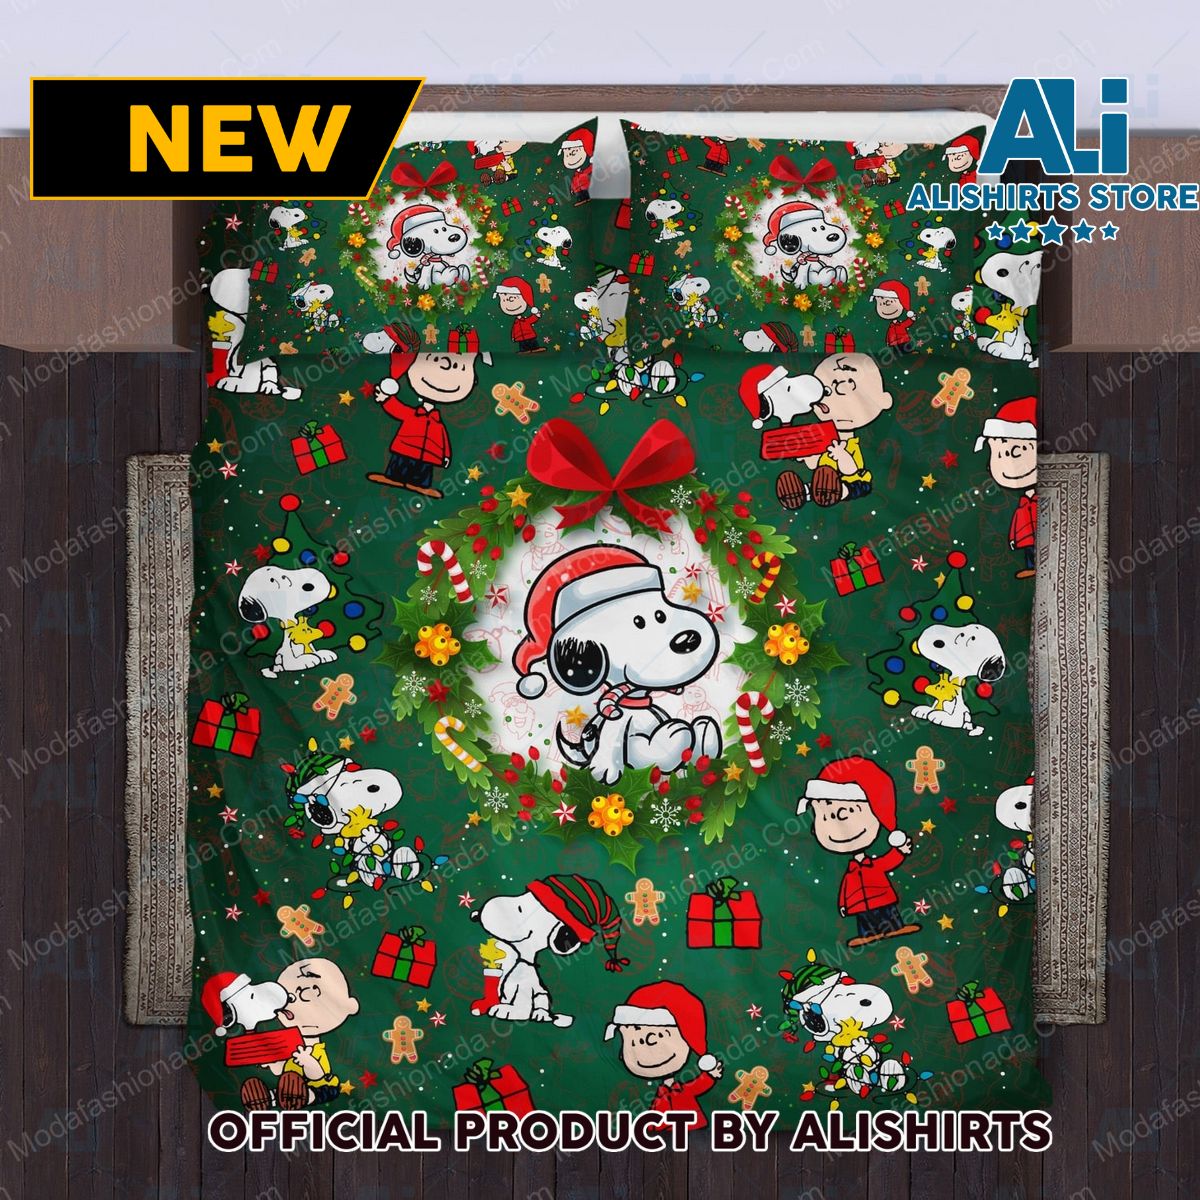 Snoopy Merry Christmas Bedding Sets